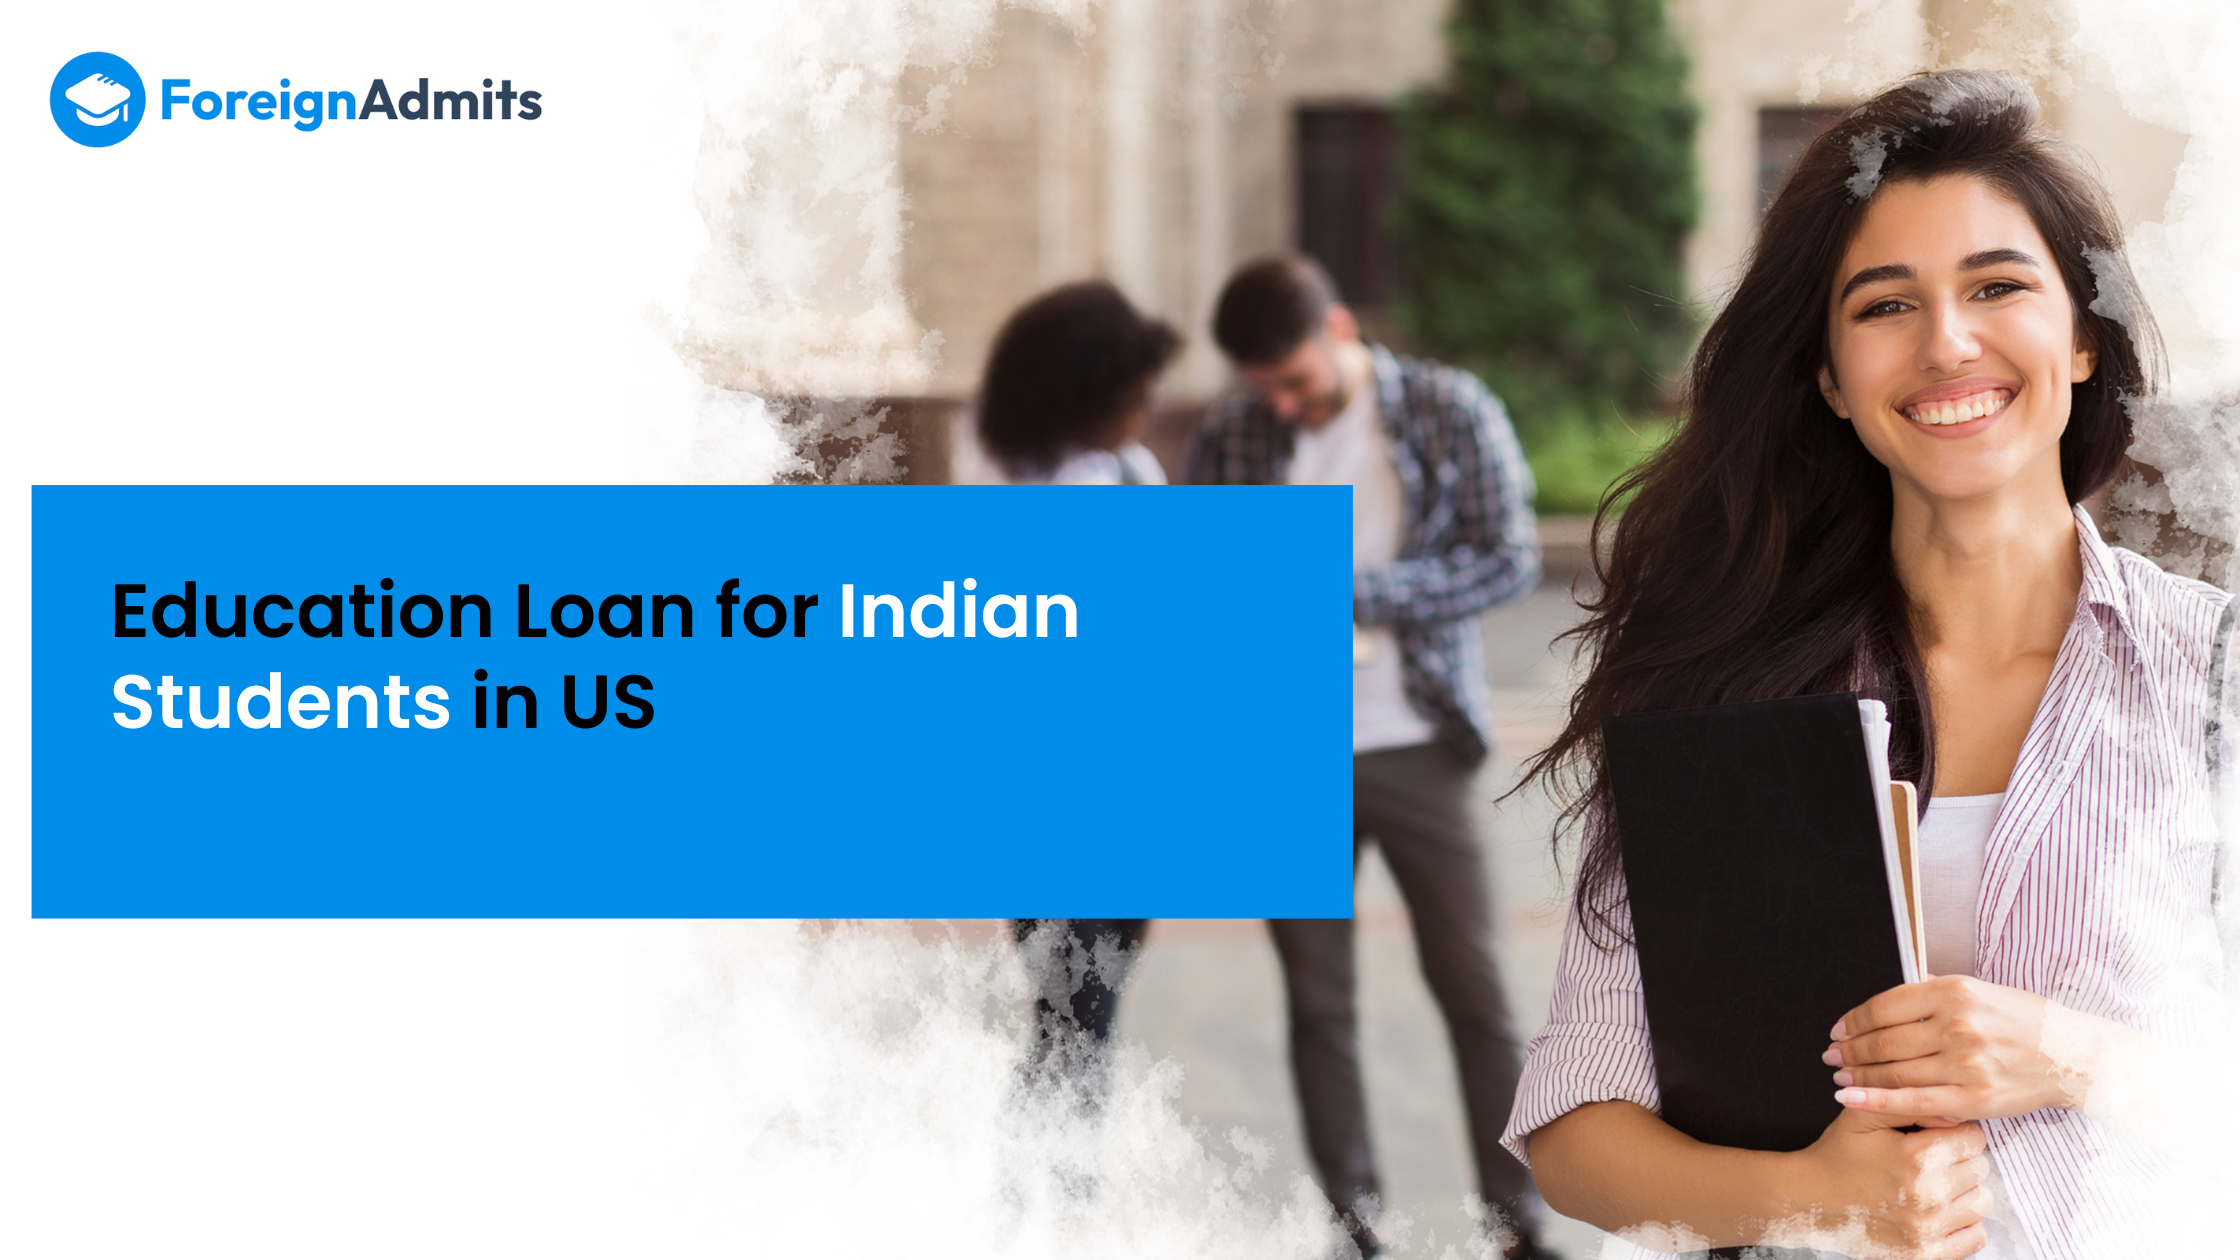 Education Loan for Indian Students in the US